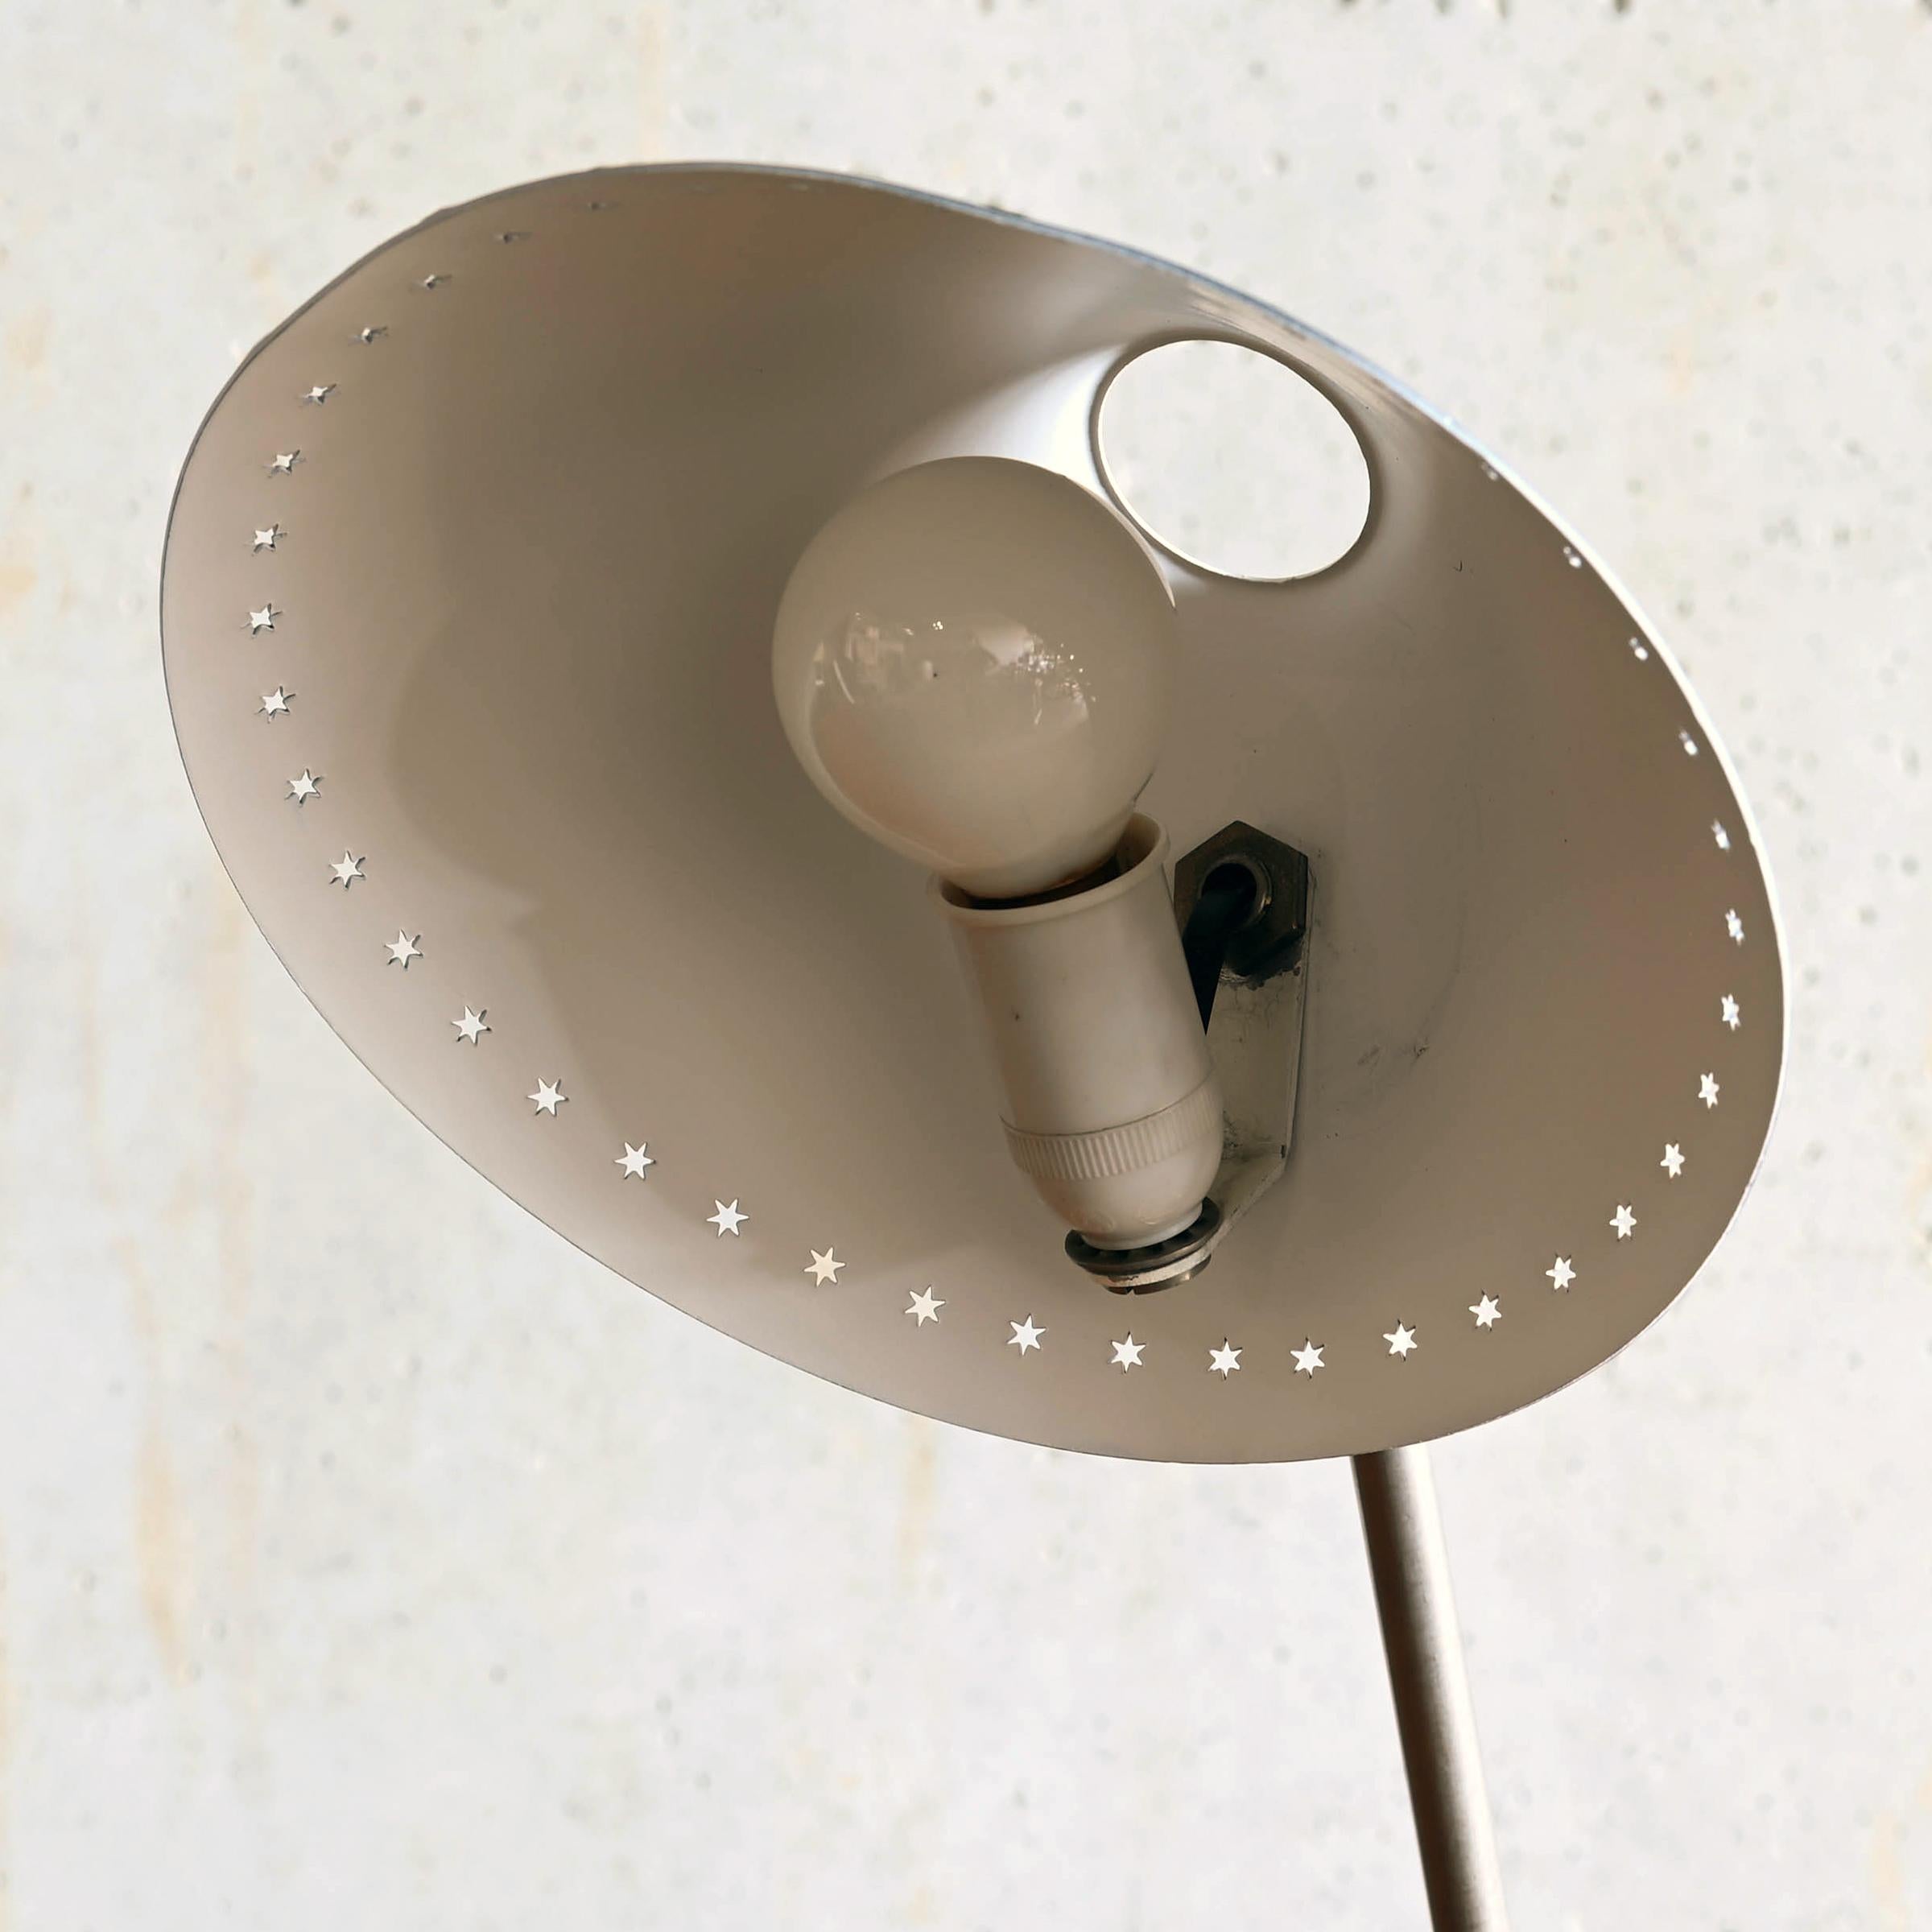 Mid-20th Century Pinocchio Lamp with black shade by H. Busquet for Hala Zeist, Netherlands